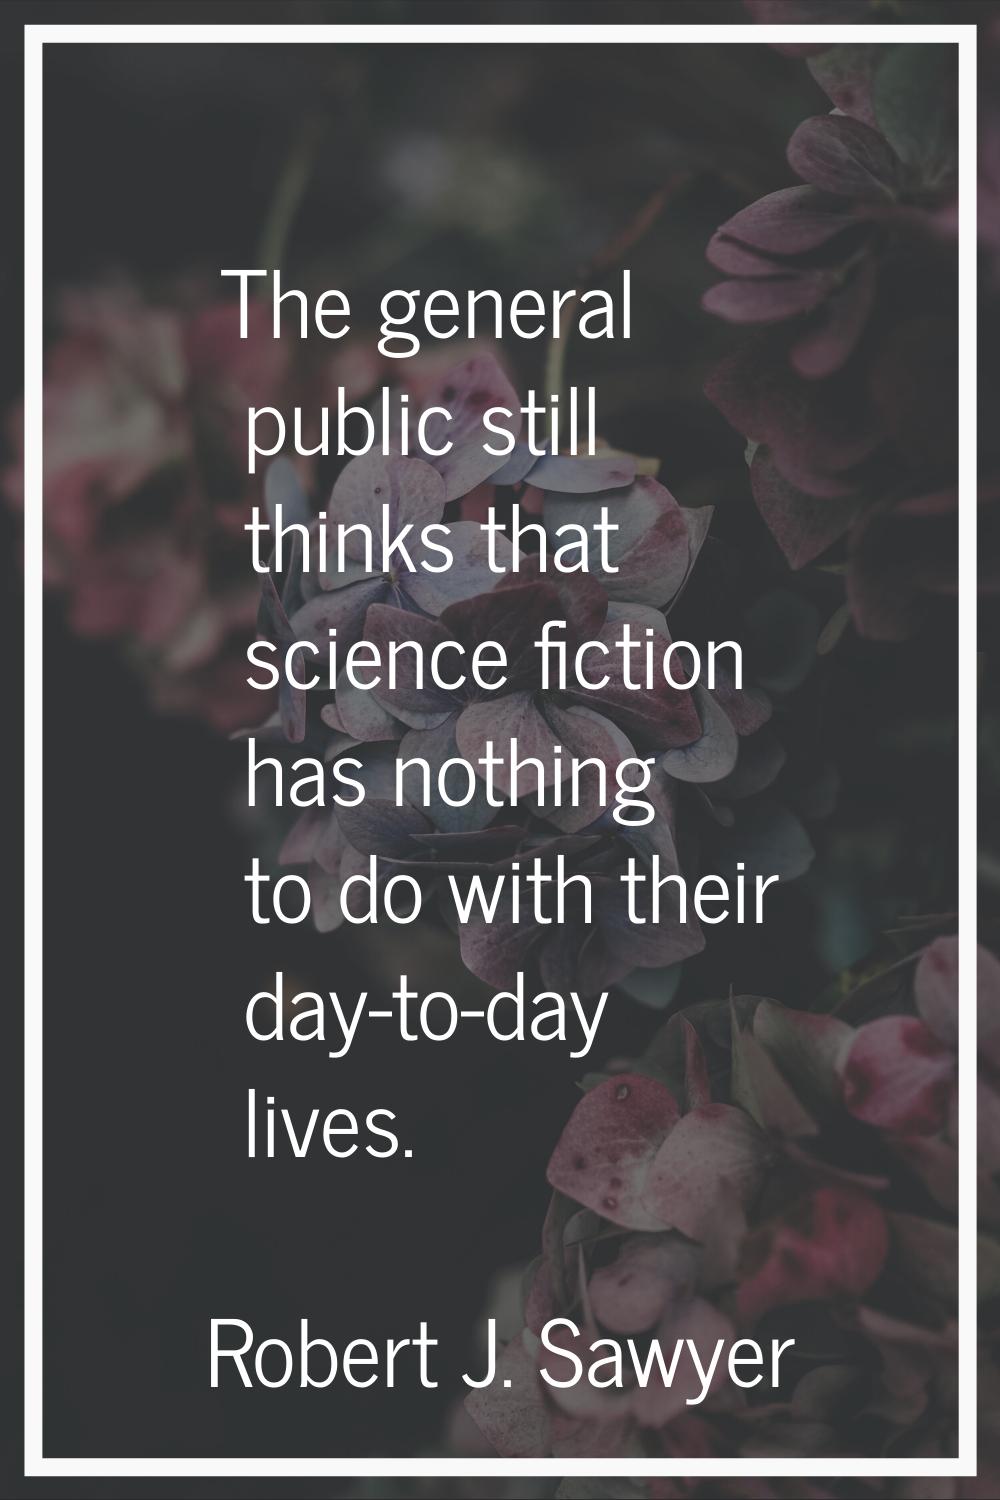 The general public still thinks that science fiction has nothing to do with their day-to-day lives.